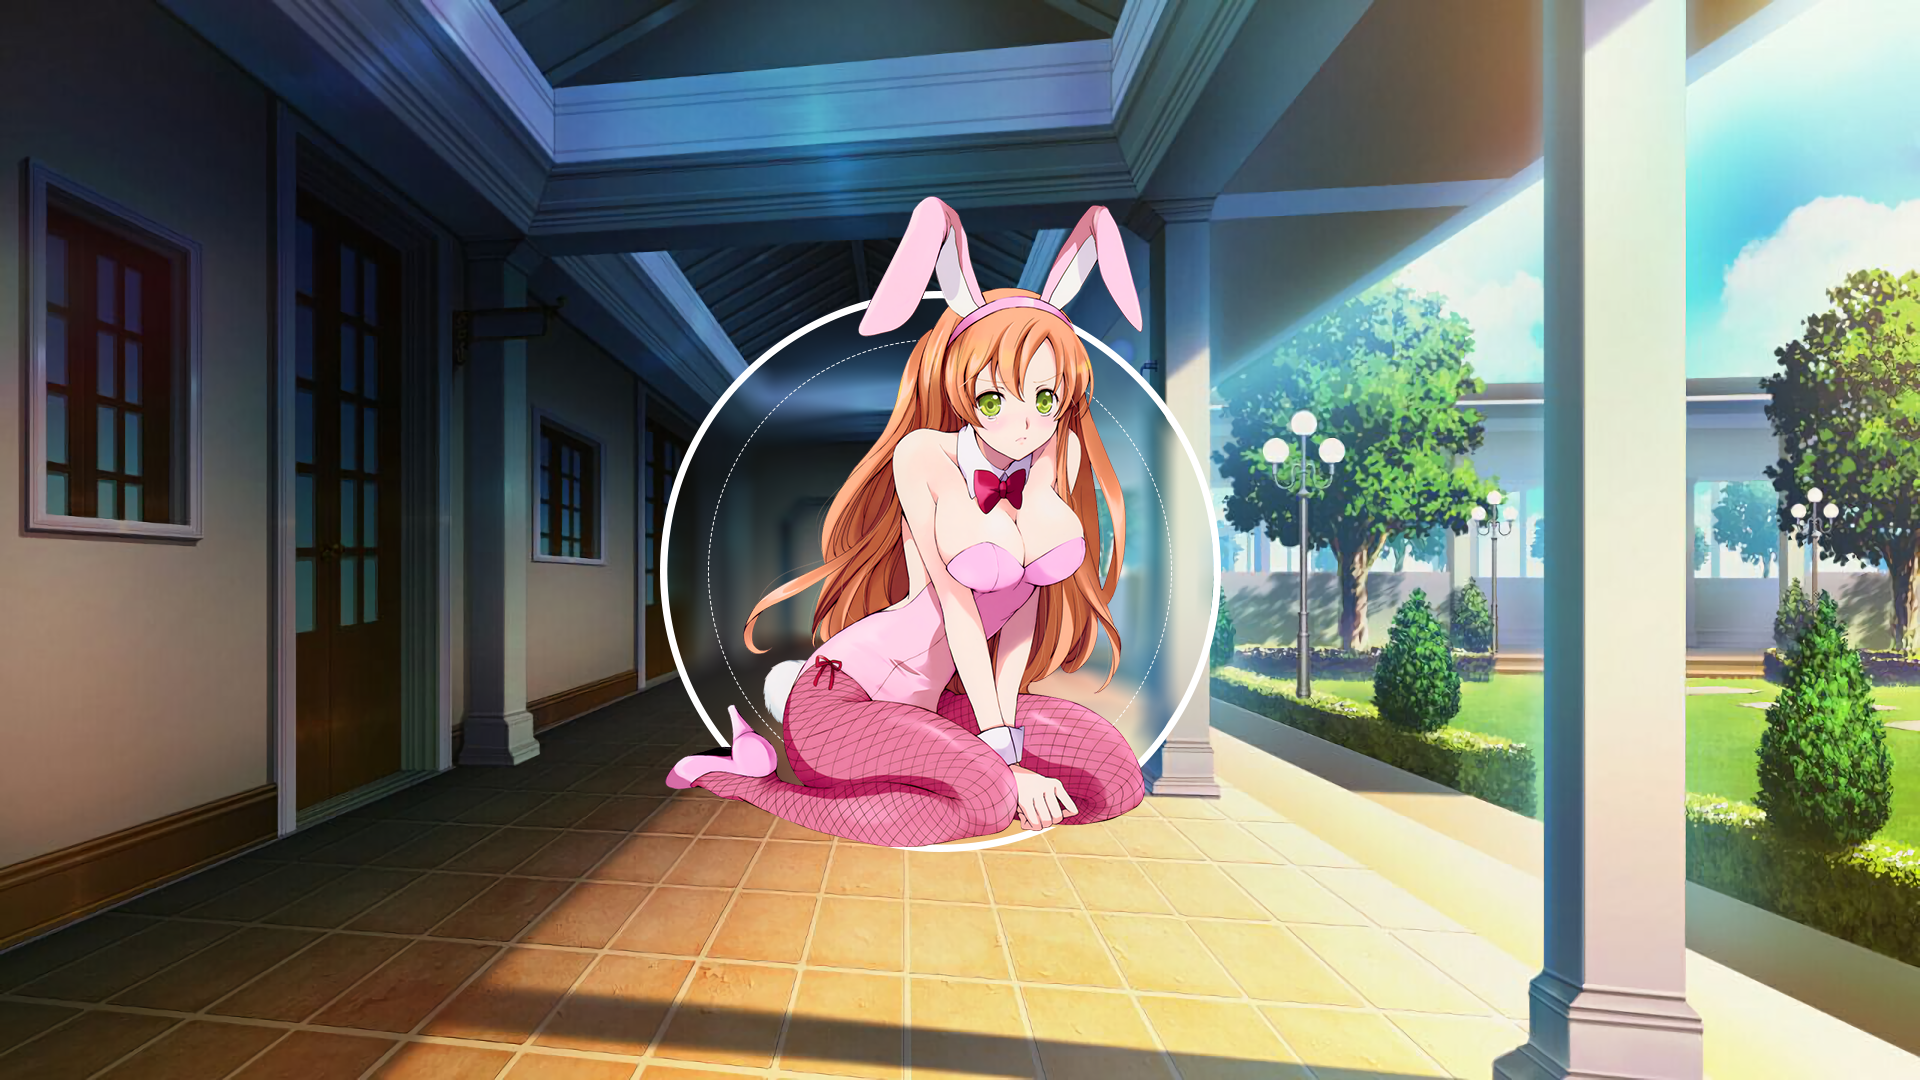 Picture In Picture Anime Anime Girls Code Geass Shirley Fenette Redhead Green Eyes School Bunny Ears 1920x1080